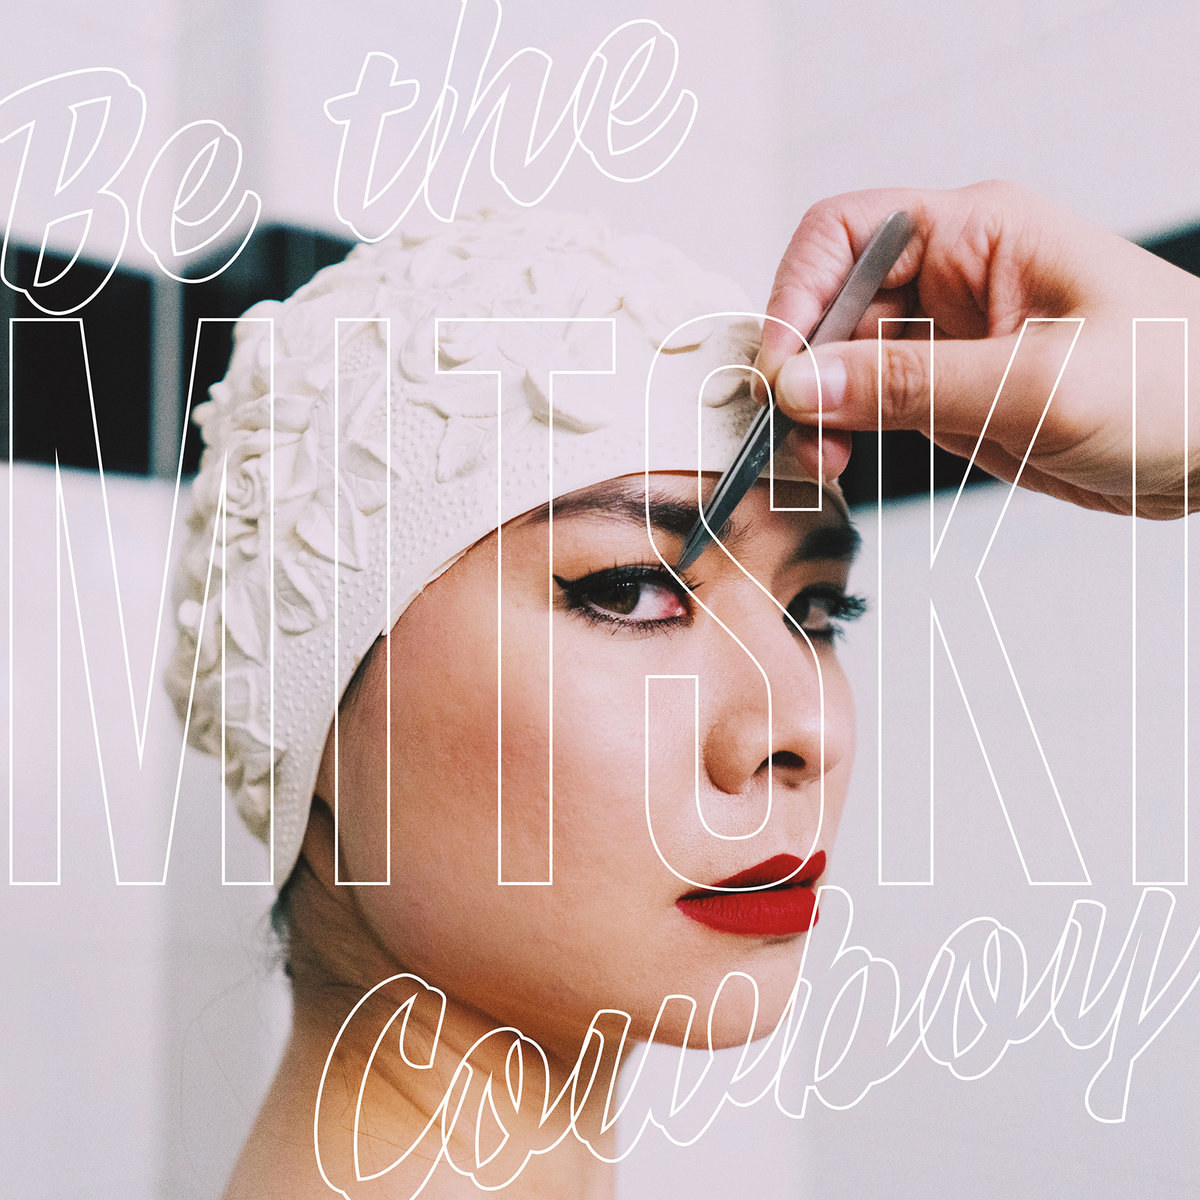 album cover for &quot;be the cowboy&quot; by mitski, which is a woman wearing lipstick and eyeliner, looking over her shoulder at the camera